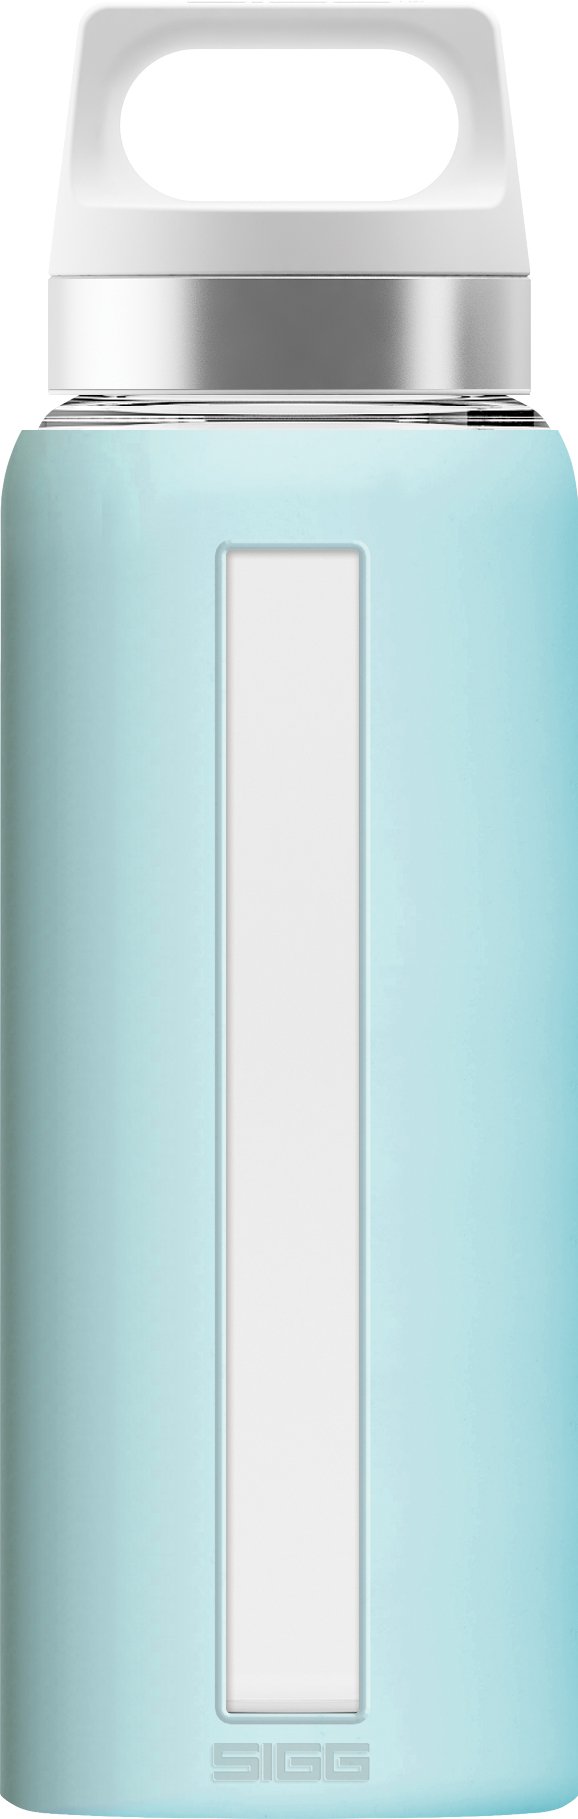 Sigg Glass Water Bottle-Dream Shade-Turquoise Soft Silicon Cover Leakproof-Dishwasher Safe-BPA Free-Broscilate Glass-22 Oz, 0.65